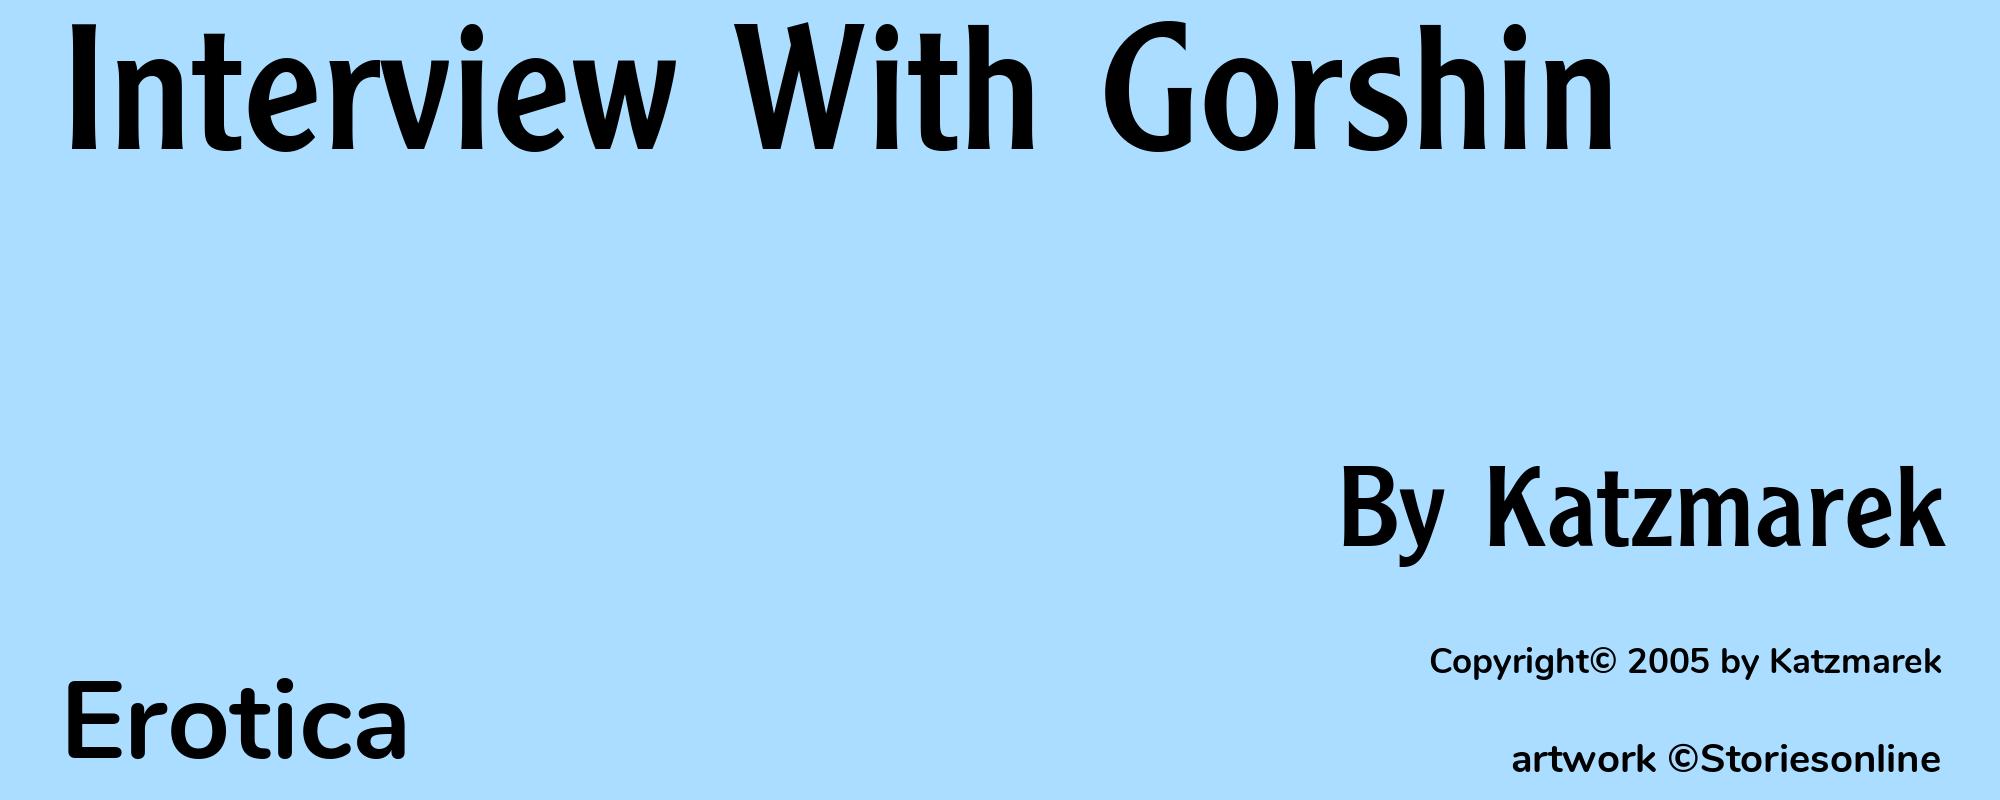 Interview With Gorshin - Cover